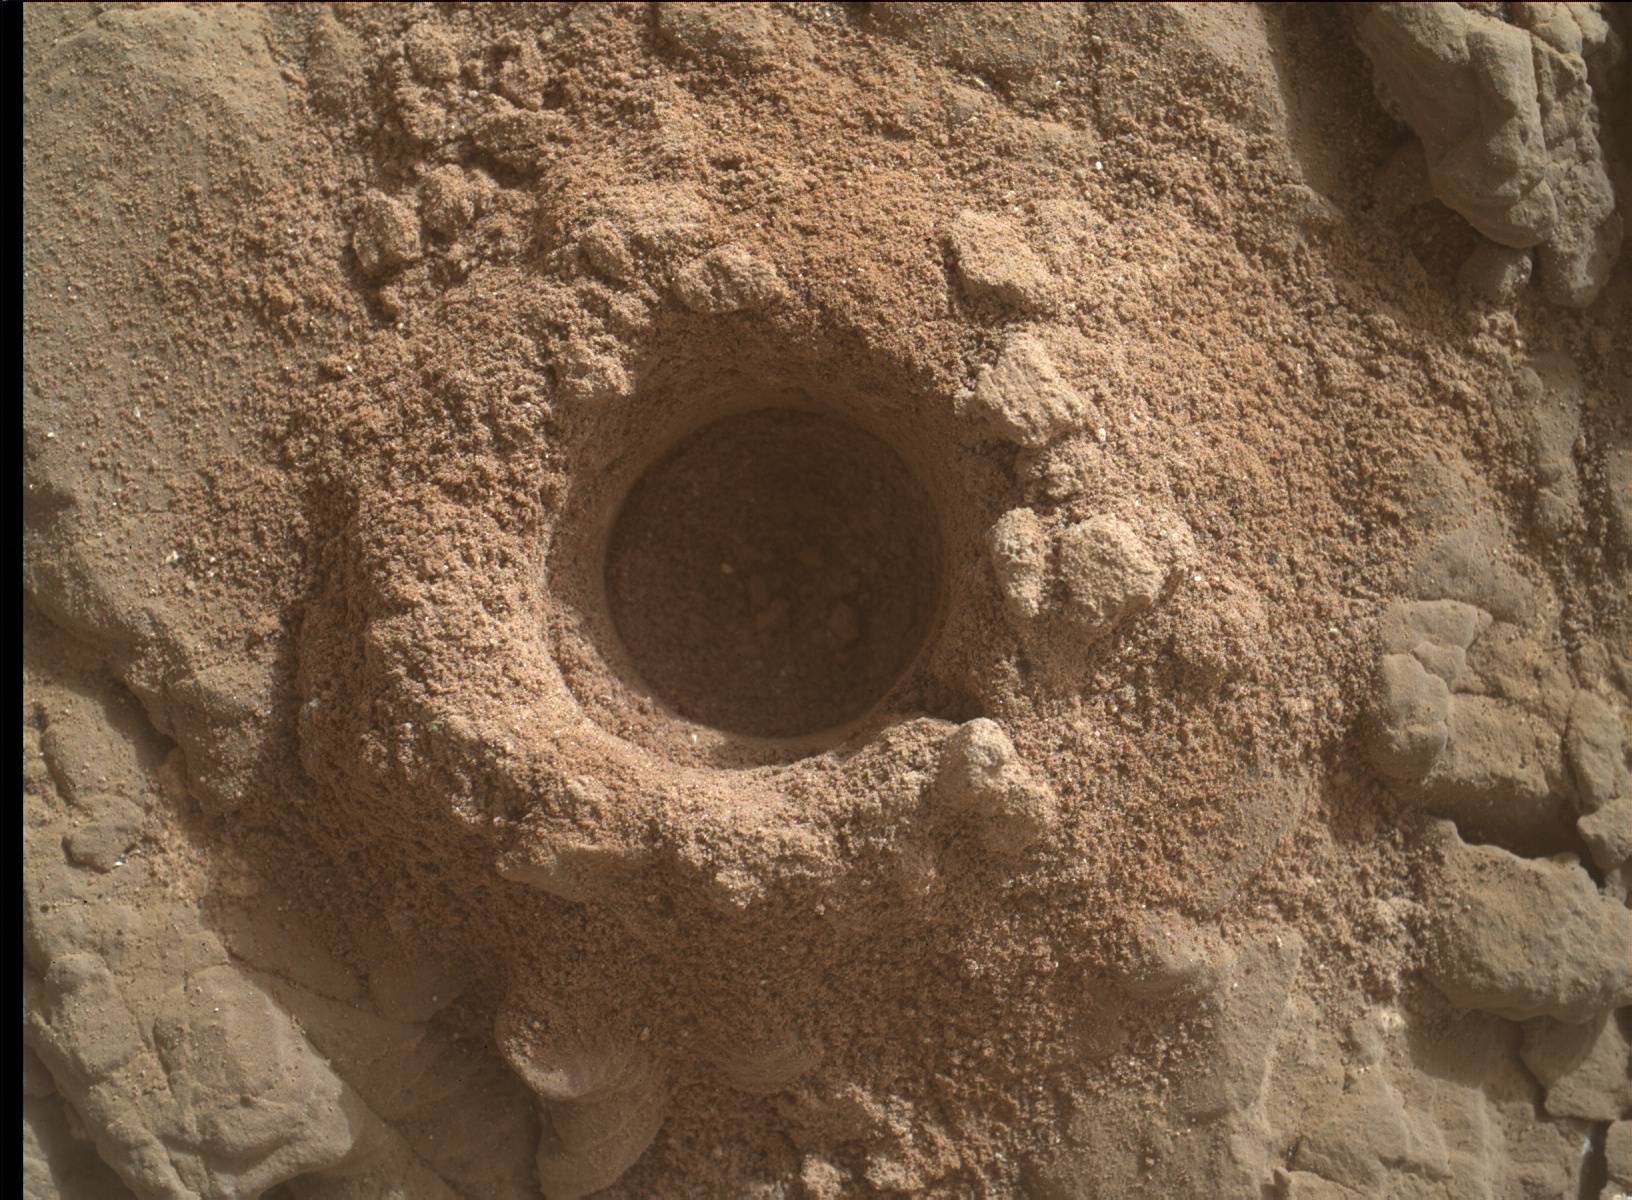 Nasa's Mars rover Curiosity acquired this image using its Mars Hand Lens Imager (MAHLI) on Sol 2404